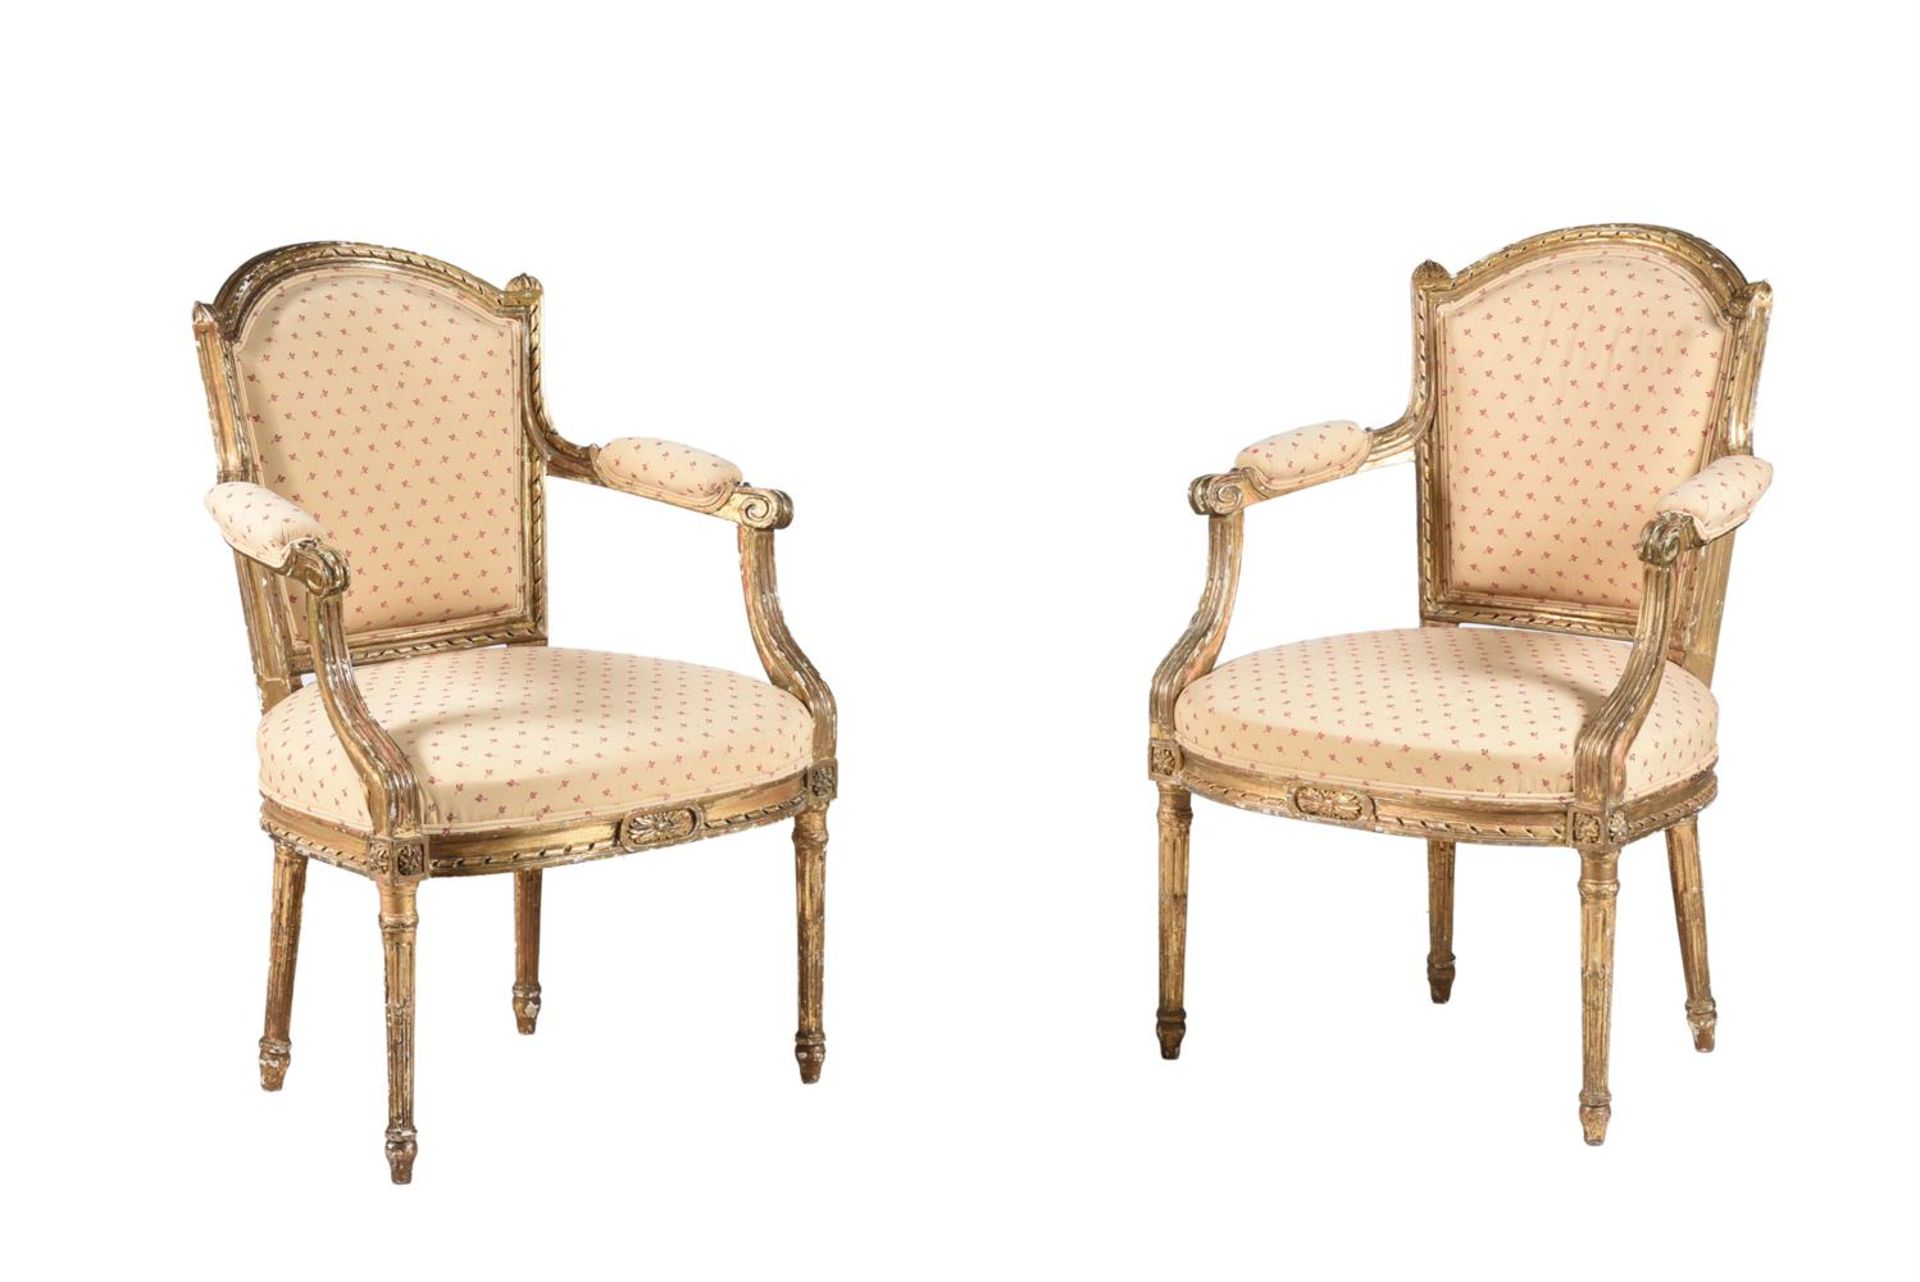 A PAIR OF FRENCH GILTWOOD AND UPHOLSTERED ARMCHAIRS, LATE 19TH CENTURY